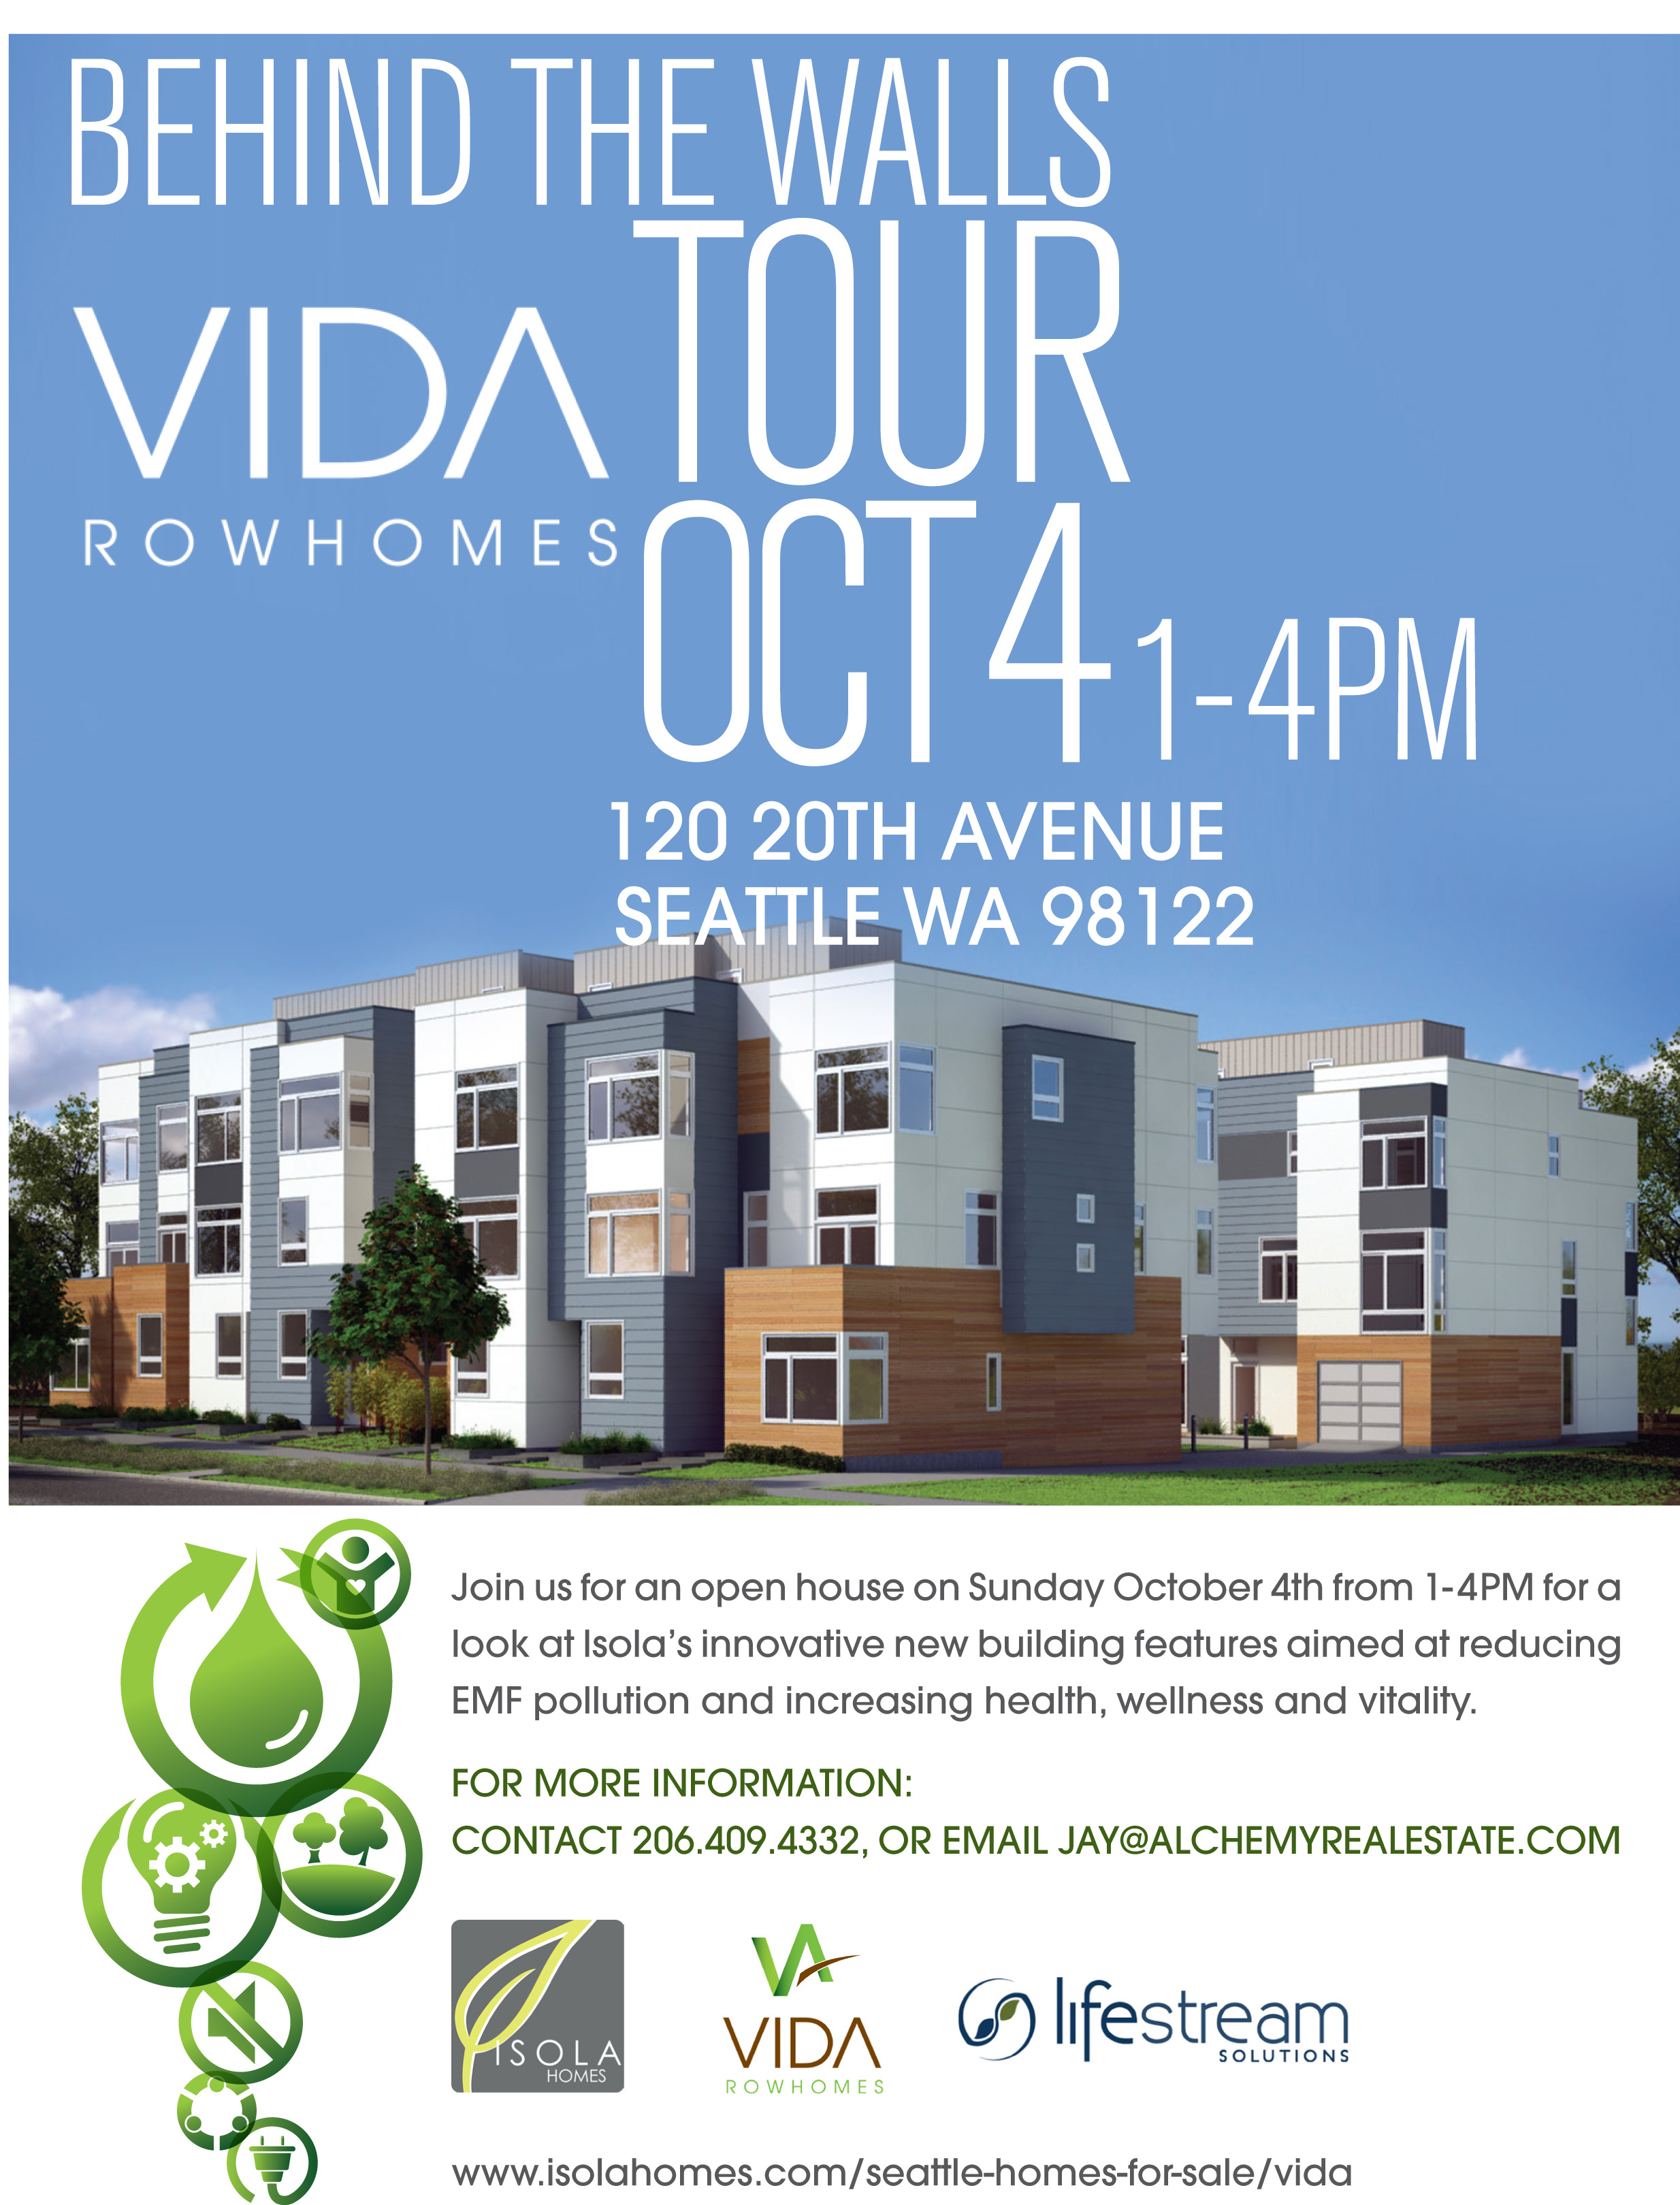 Seattle's leading green home and building biologists demonstrate key construction techniques used for VIDA, a green community design of 15 rowhomes in the Central District, located at 120 20th Ave, on Oct 4th from 1pm-4pm.